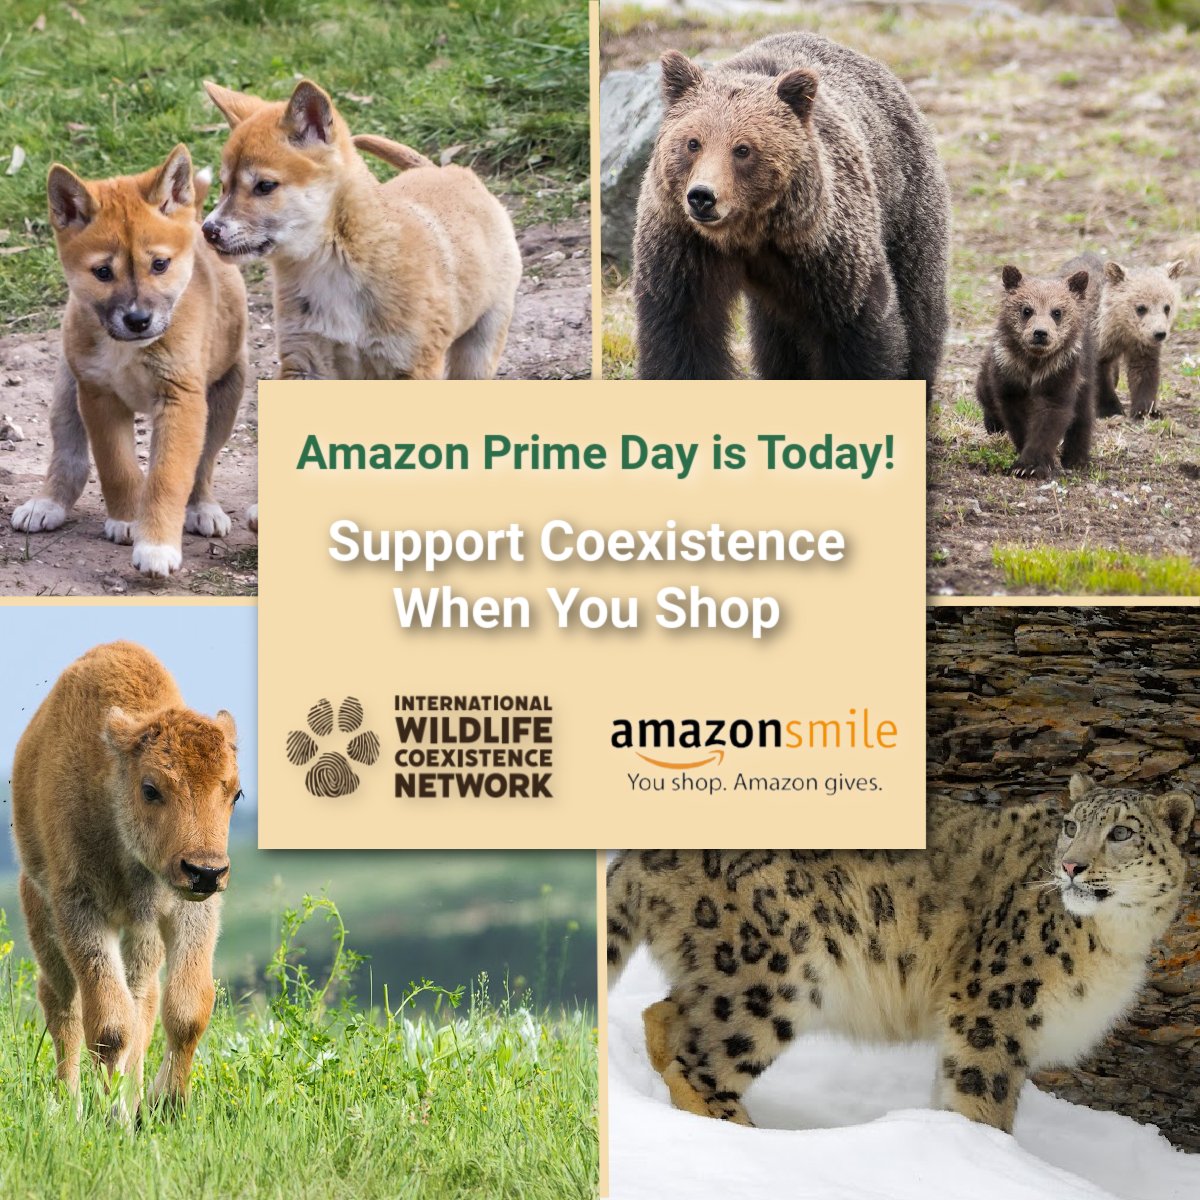 It's Amazon Prime Day! If you are shopping today, use AmazonSmile.com and choose IWCN as your charity of choice. You will get great savings and help communities coexist with #wildlife.